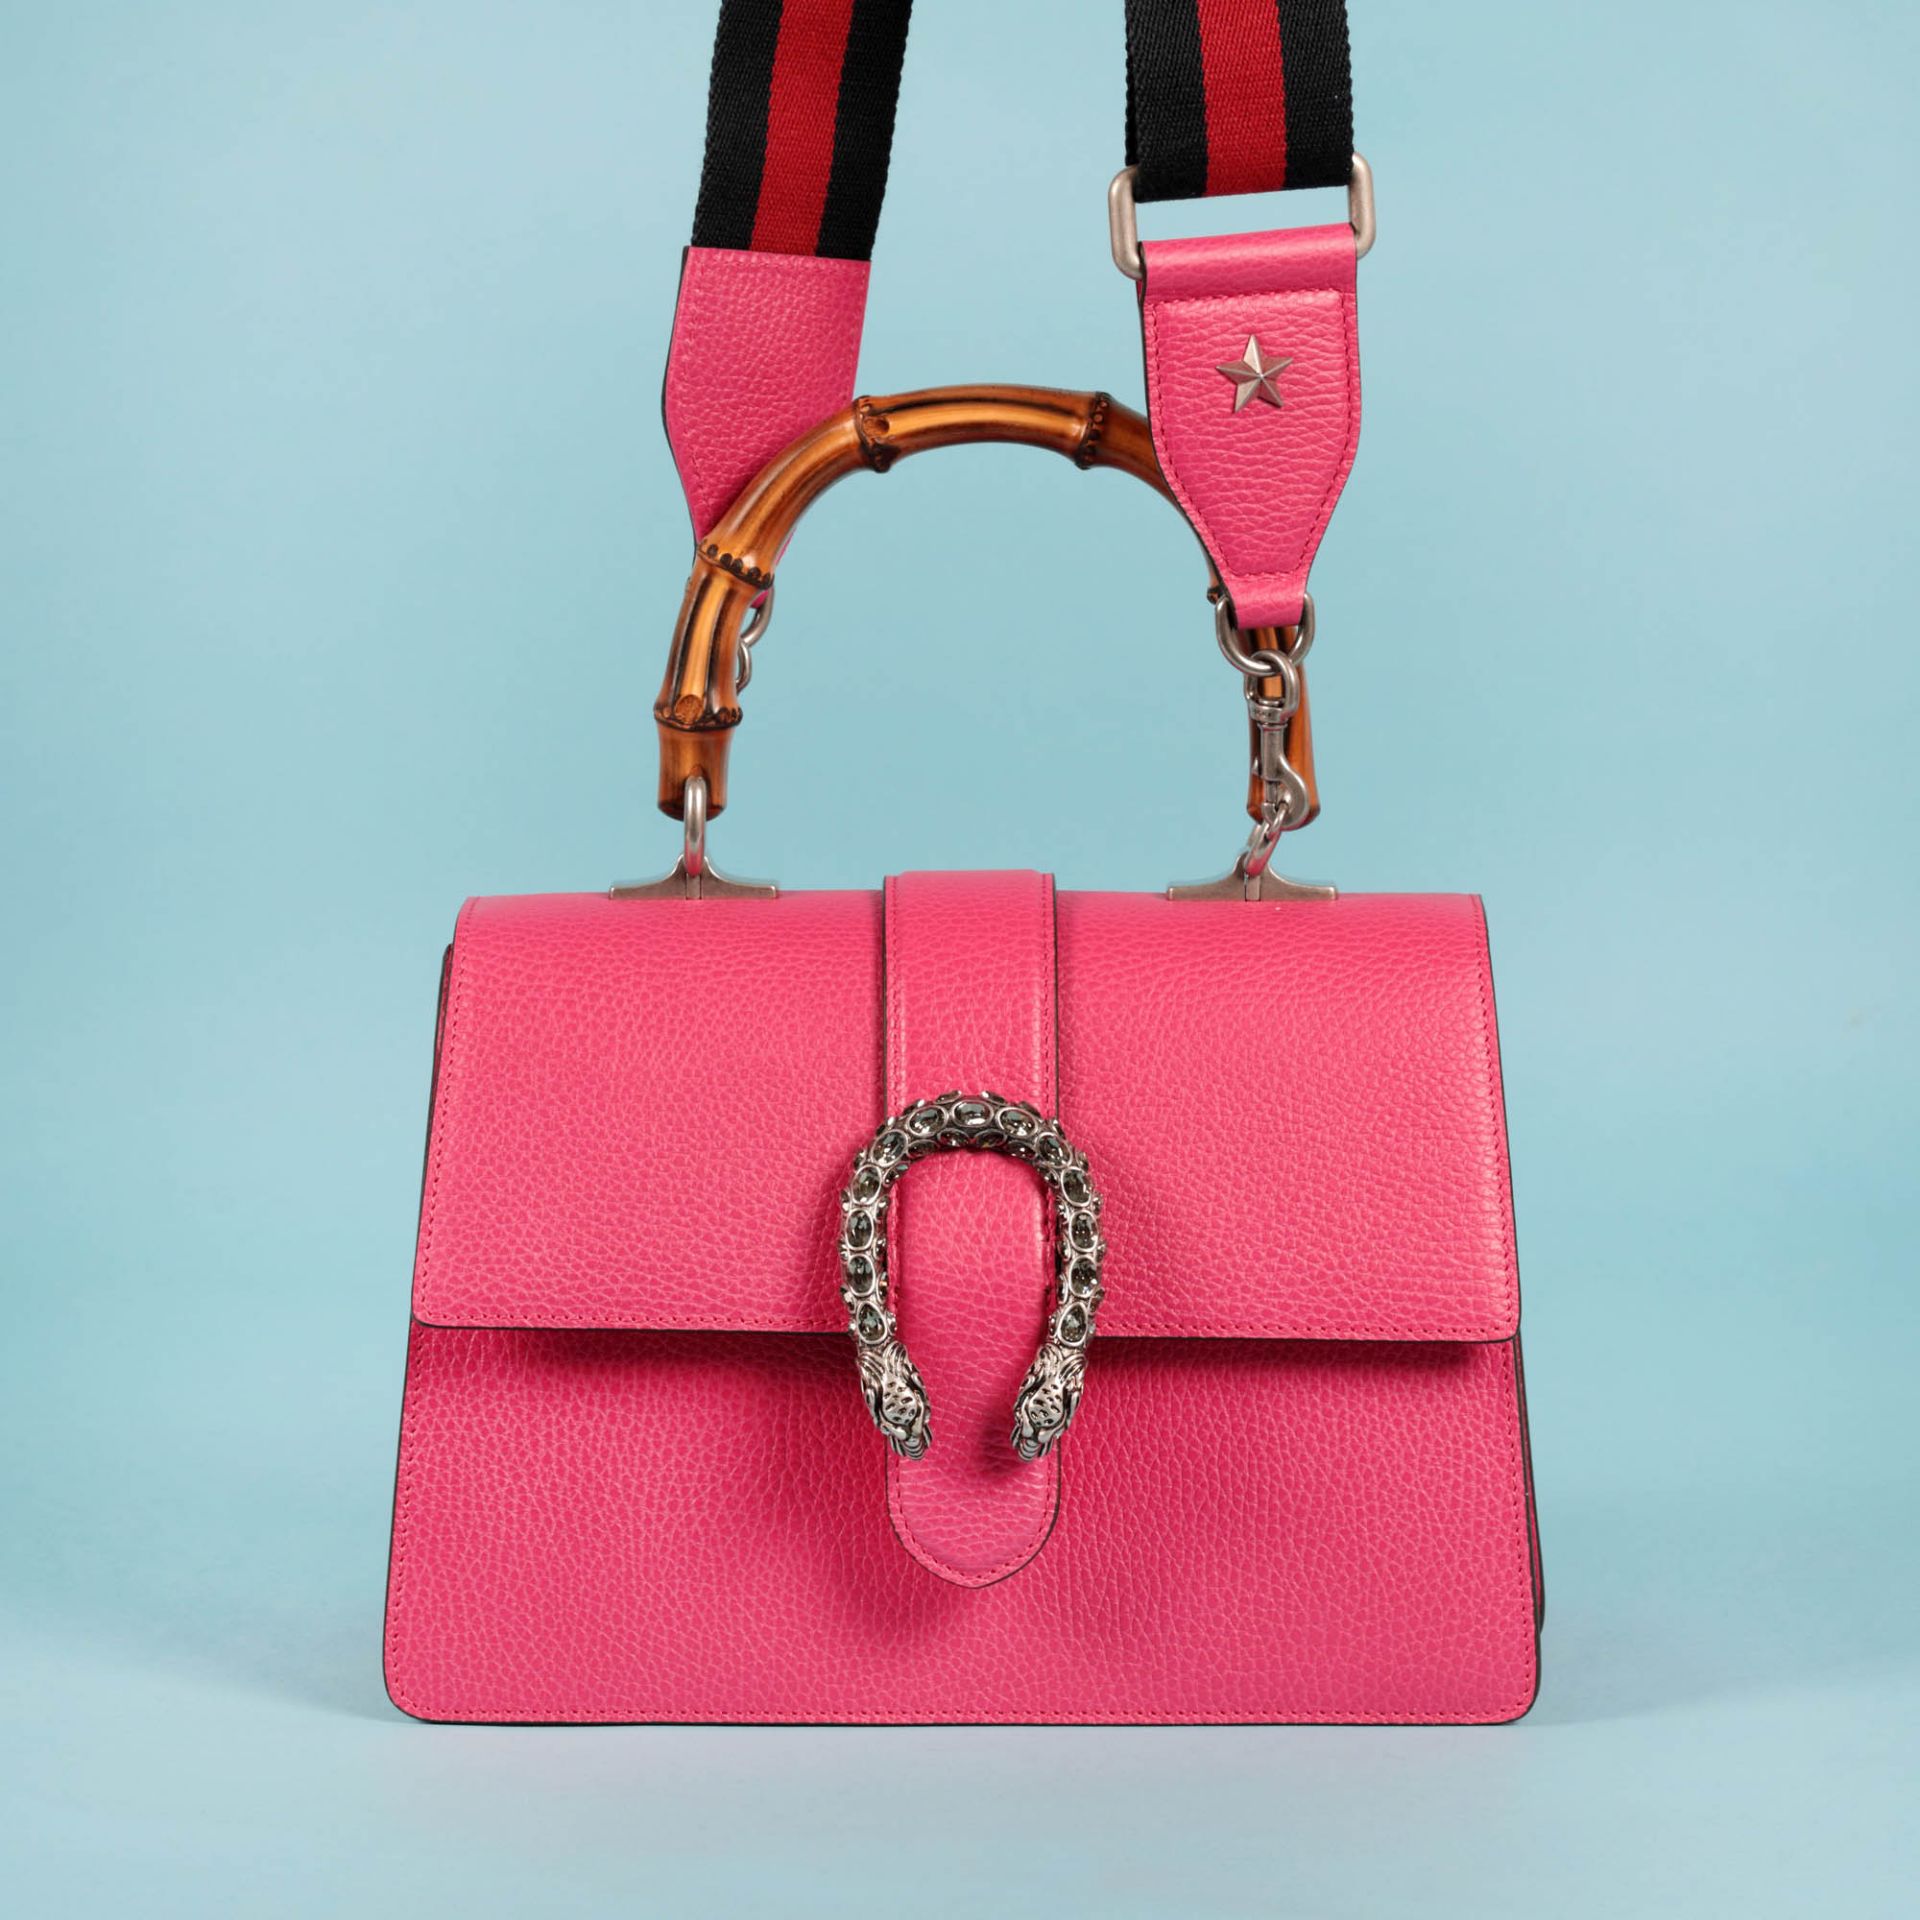 "Dionysus" - Gucci bag, leather, pink, bamboo handle, accompanied by user manual and original box - Bild 4 aus 15